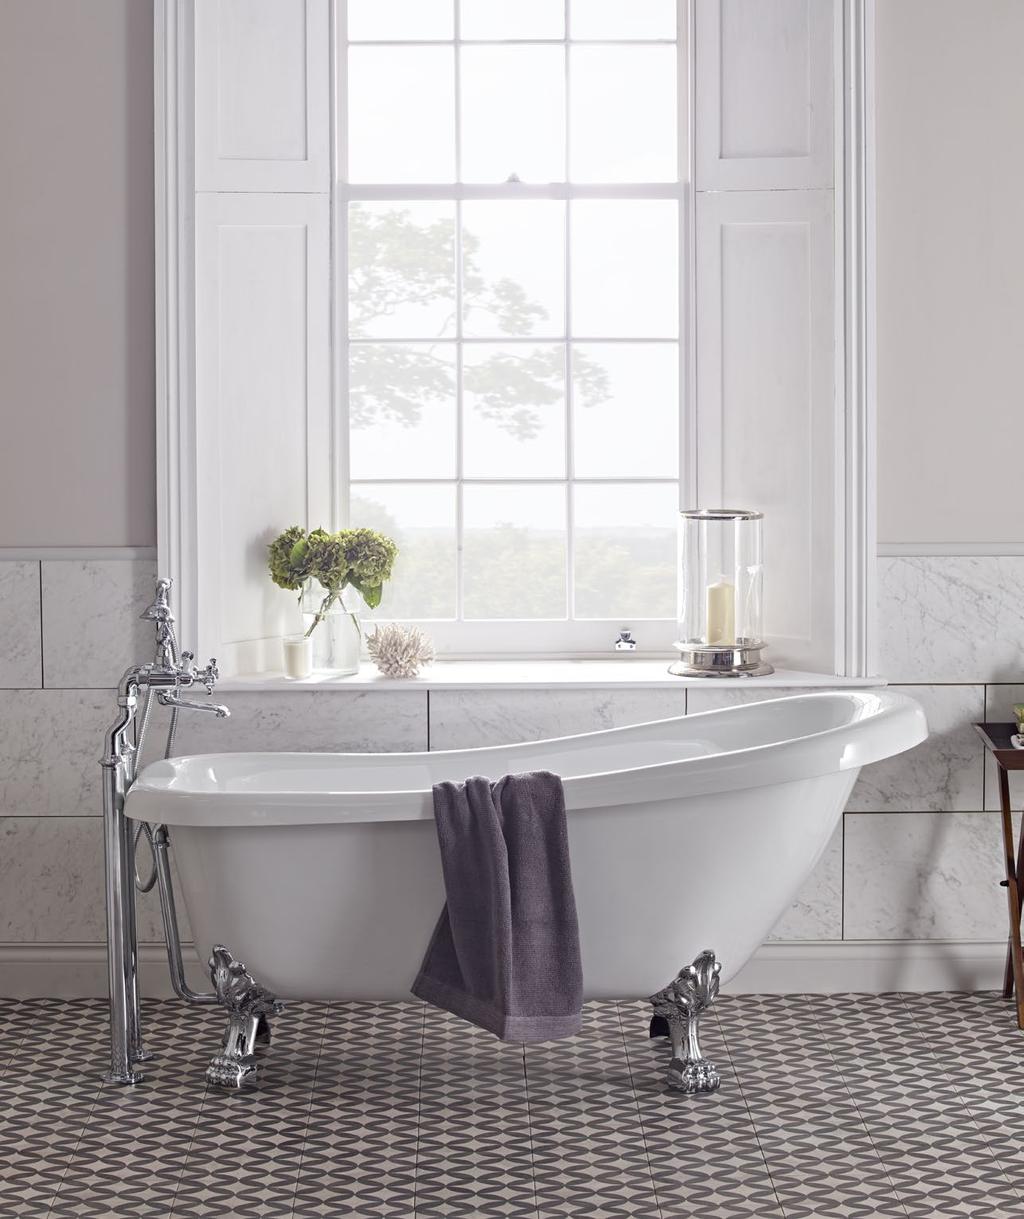 CLAREMONT With its grand styling this stunning freestanding slipper bath is available in two sizes; 1550 and 1700.